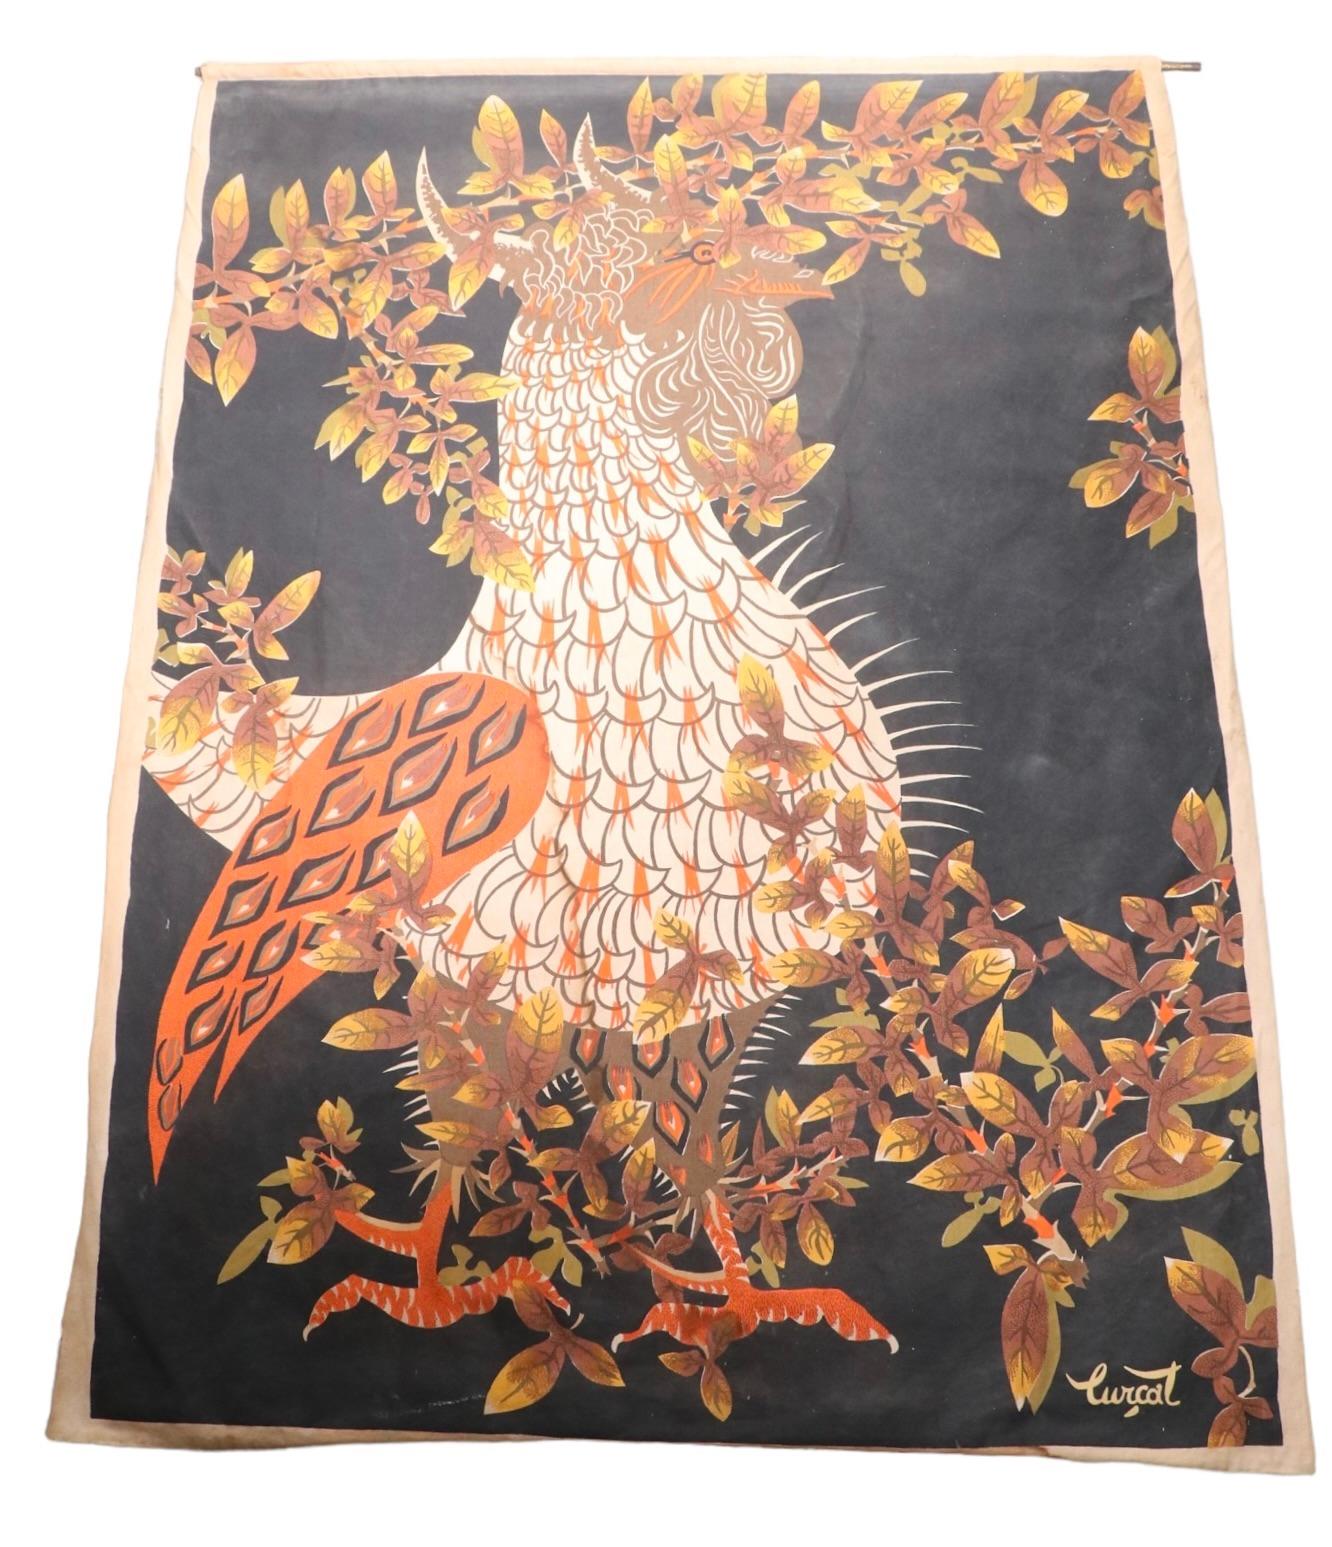 Large lithograph, tapestry style wall hanging by Jean Lucrat, printed by Corot, Made in France circa 1950's. This famous work is know as Le Tanager ( The Screamer ) . This example is in fair to good condition, there is a visible stain and general